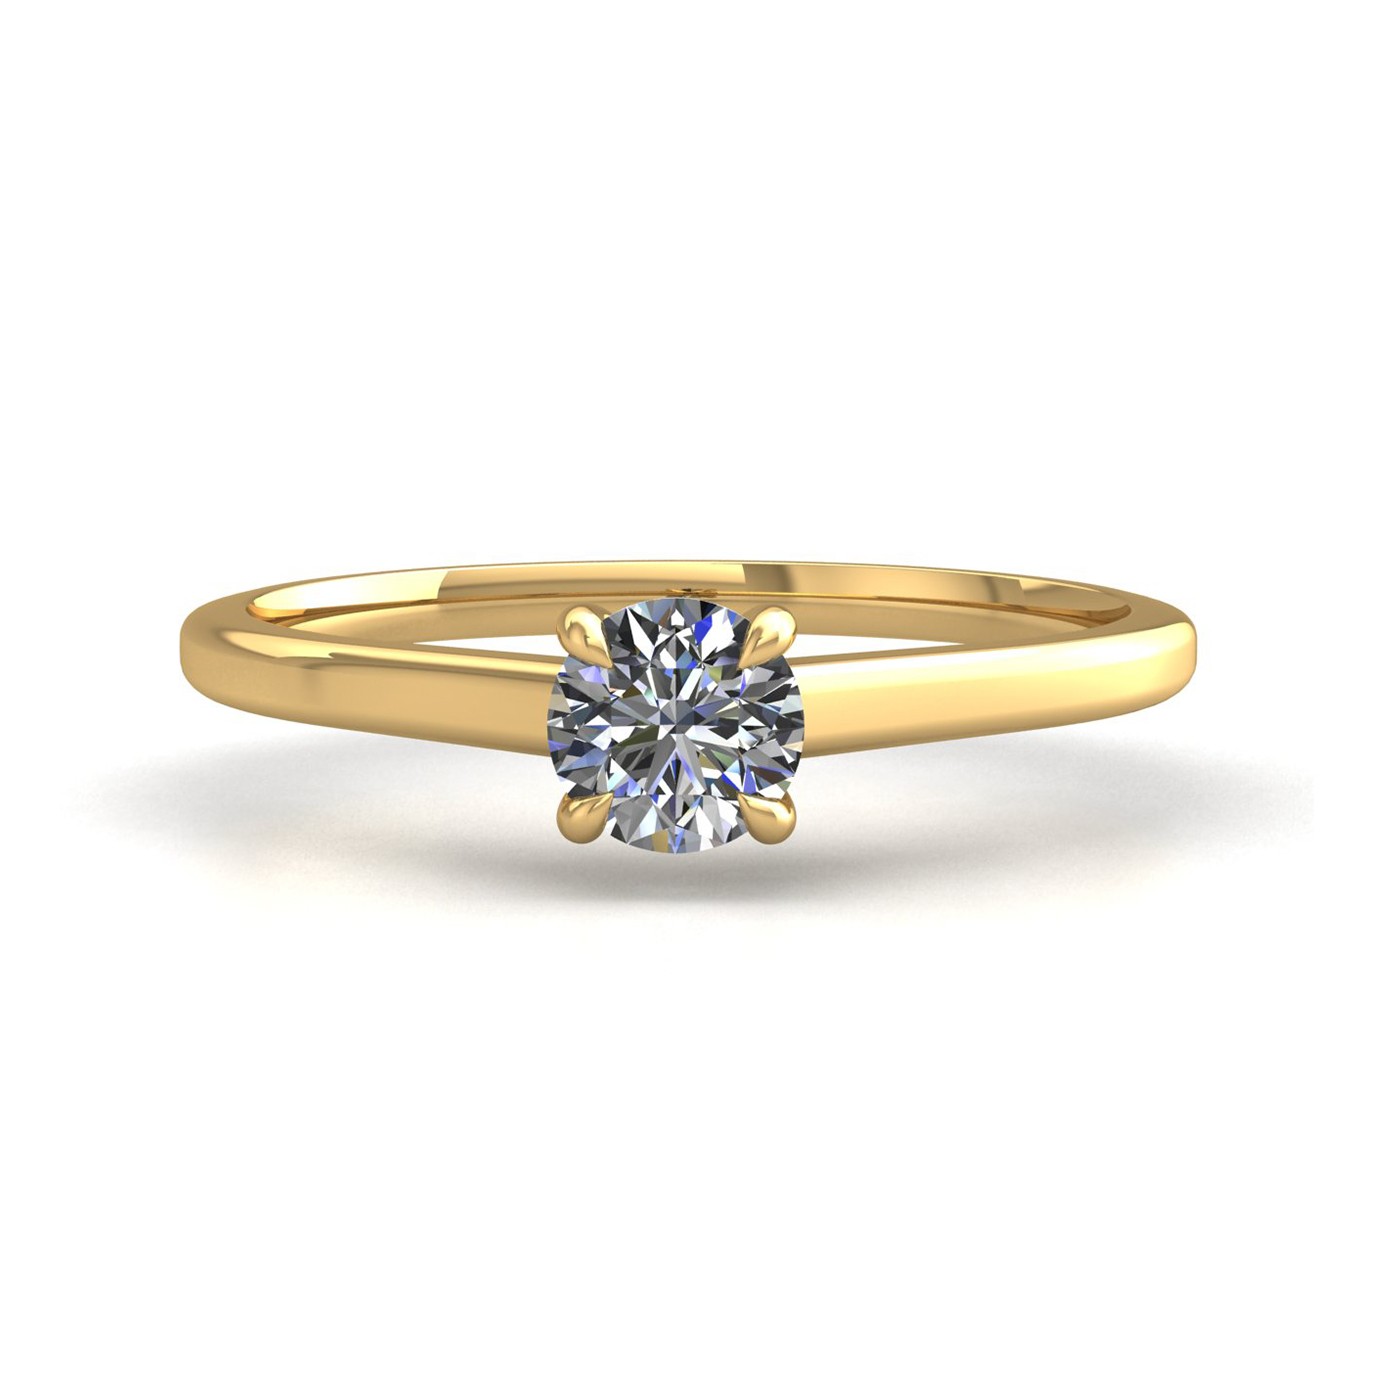 18k yellow gold  0,30 ct 4 prongs solitaire round cut diamond engagement ring with whisper thin band